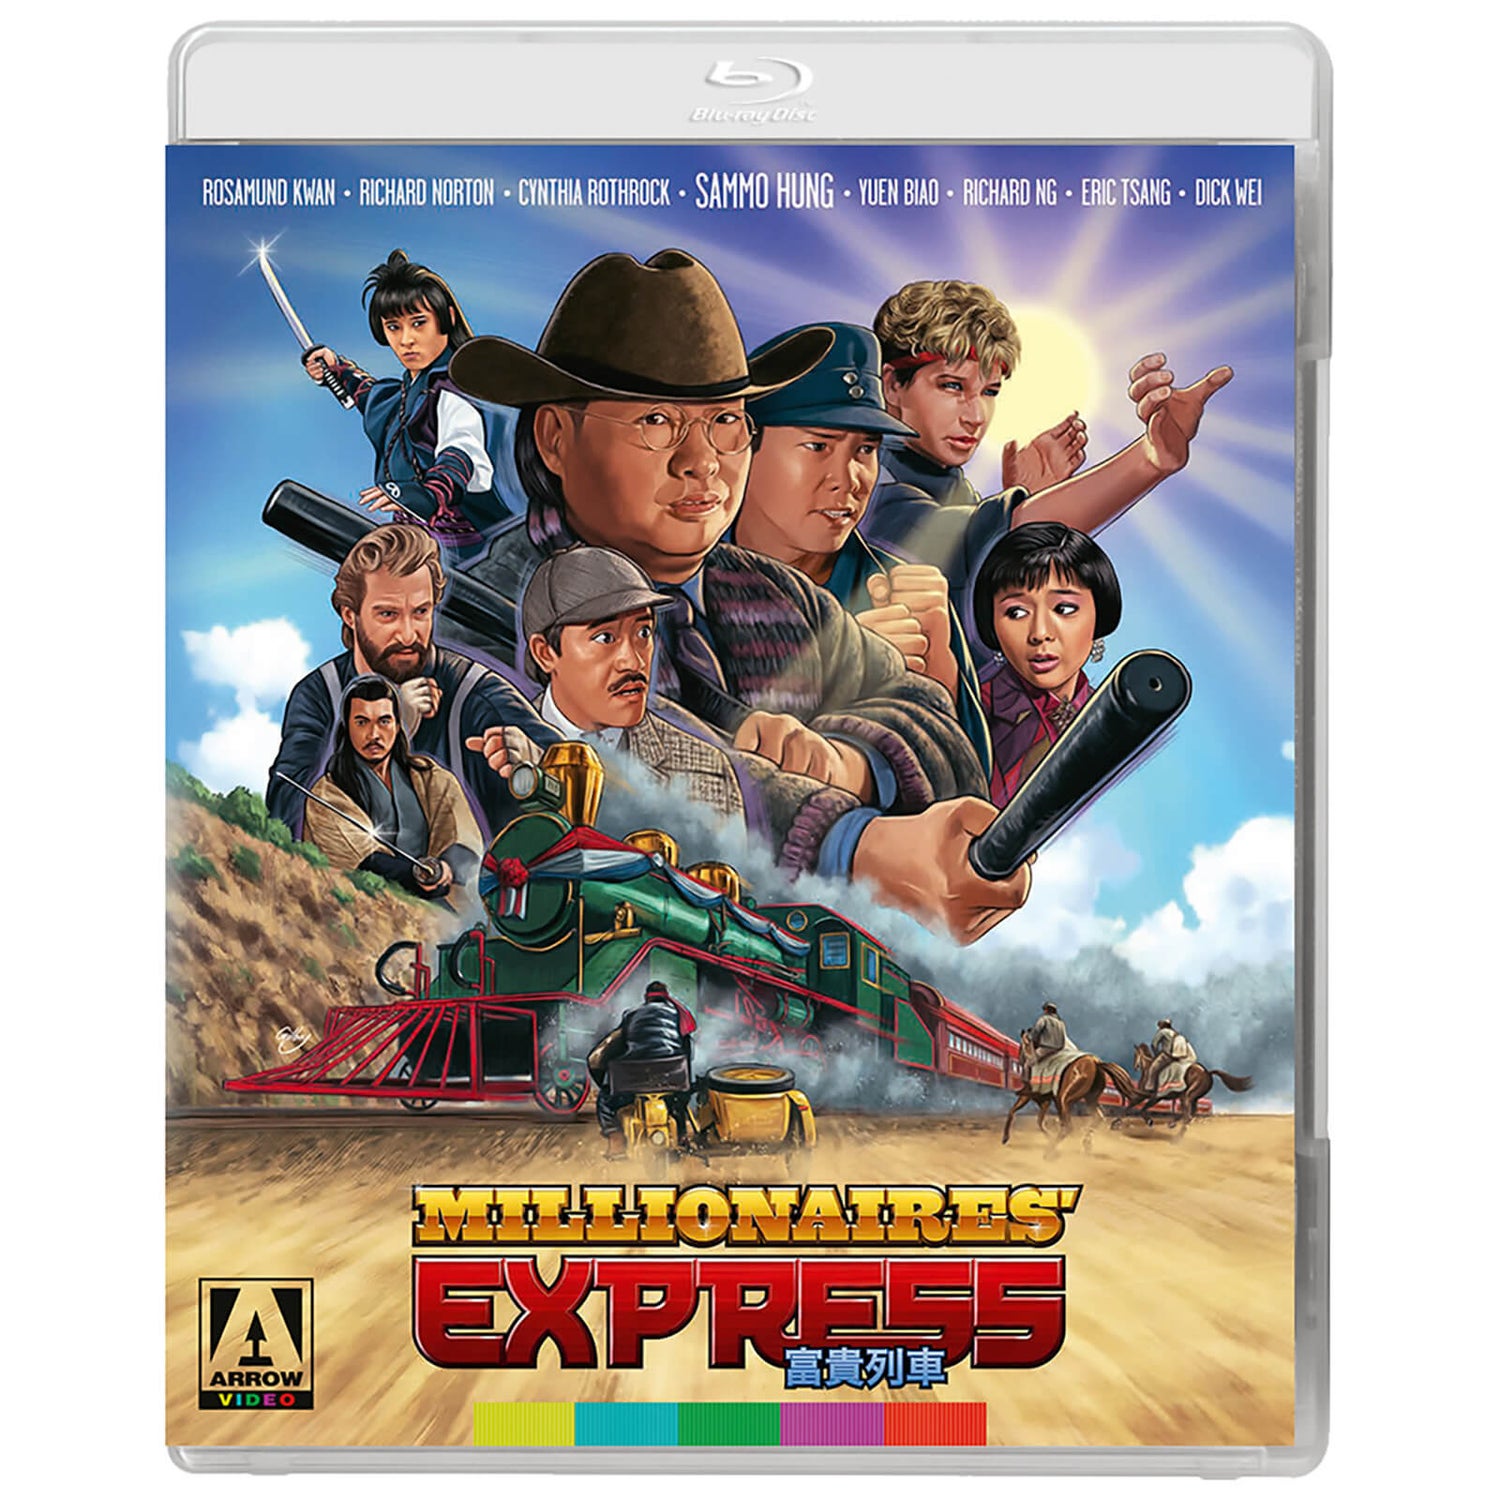 Millionaires' Express Limited Edition Blu-ray